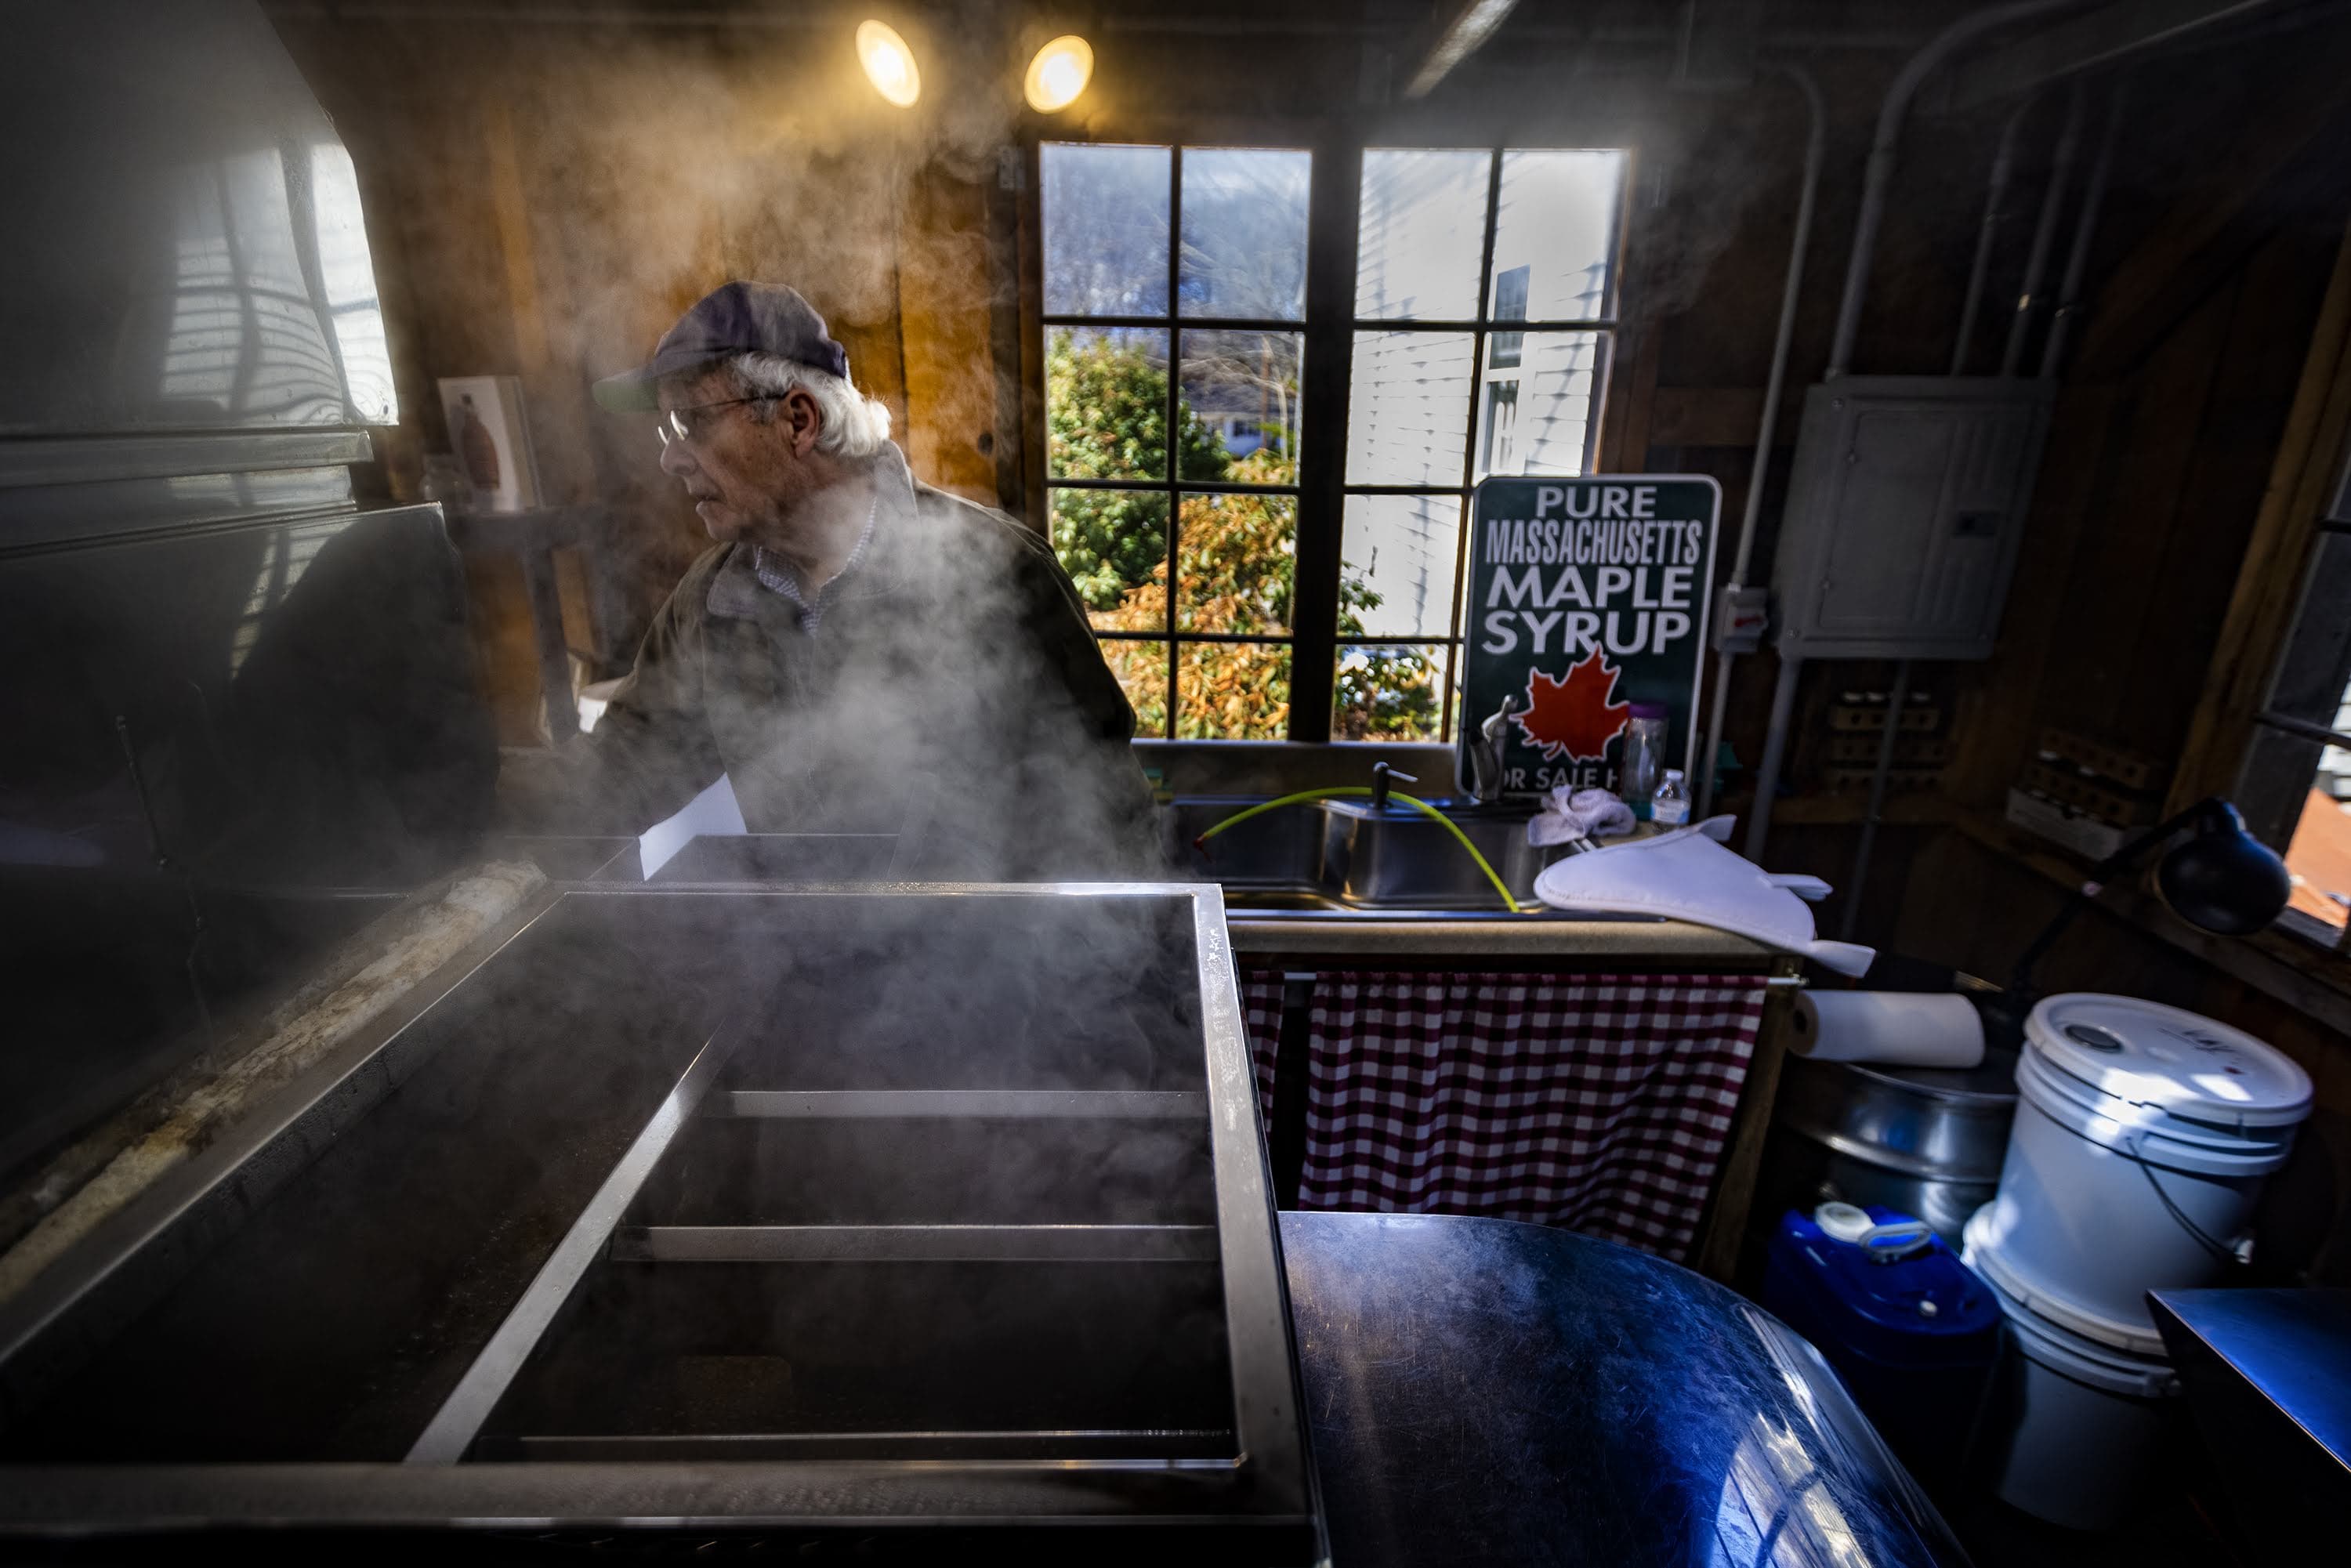 Ronald Kay checks the evaporator in the maple sugar shack at Maynard Maple to process sap he’s collected to make locally sourced maple syrup. (Jesse Costa/WBUR)